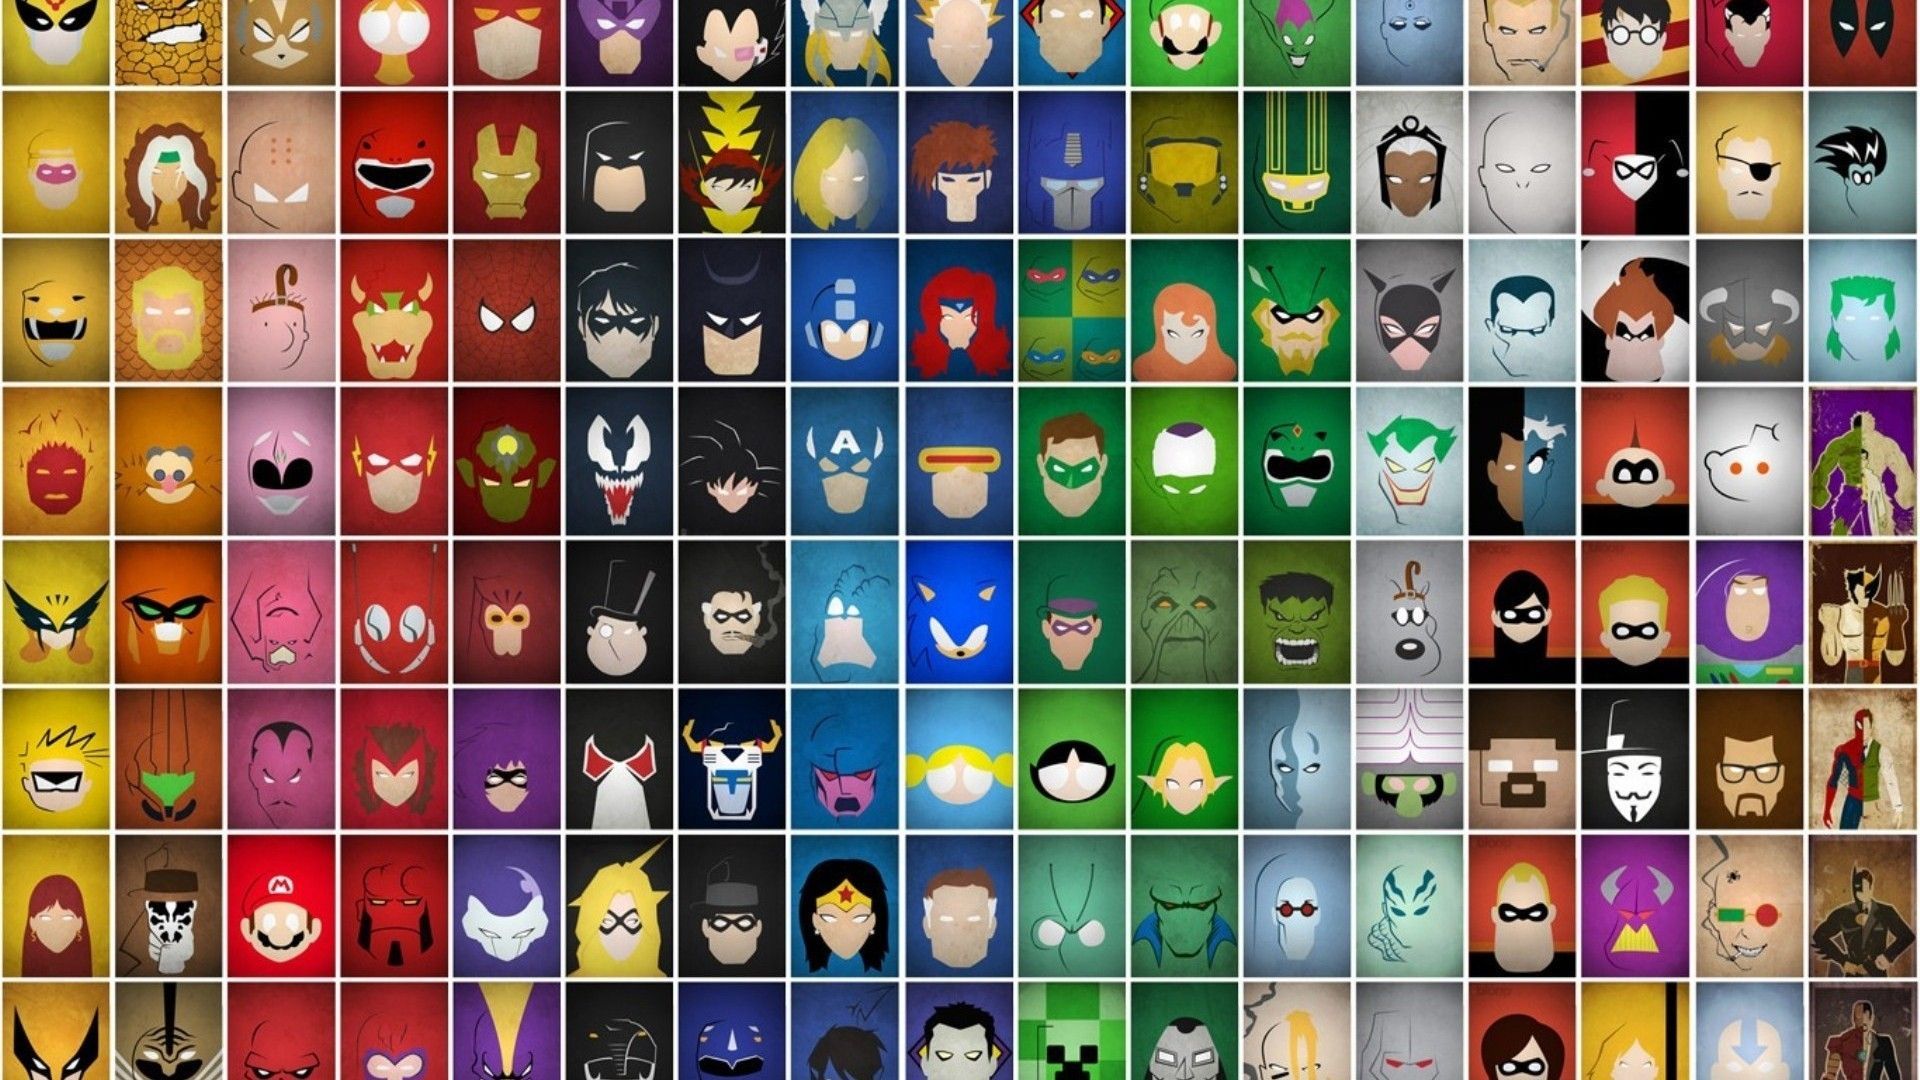 A collage of 100 different superhero faces, including Spiderman, Iron Man, and Batman. - Avengers